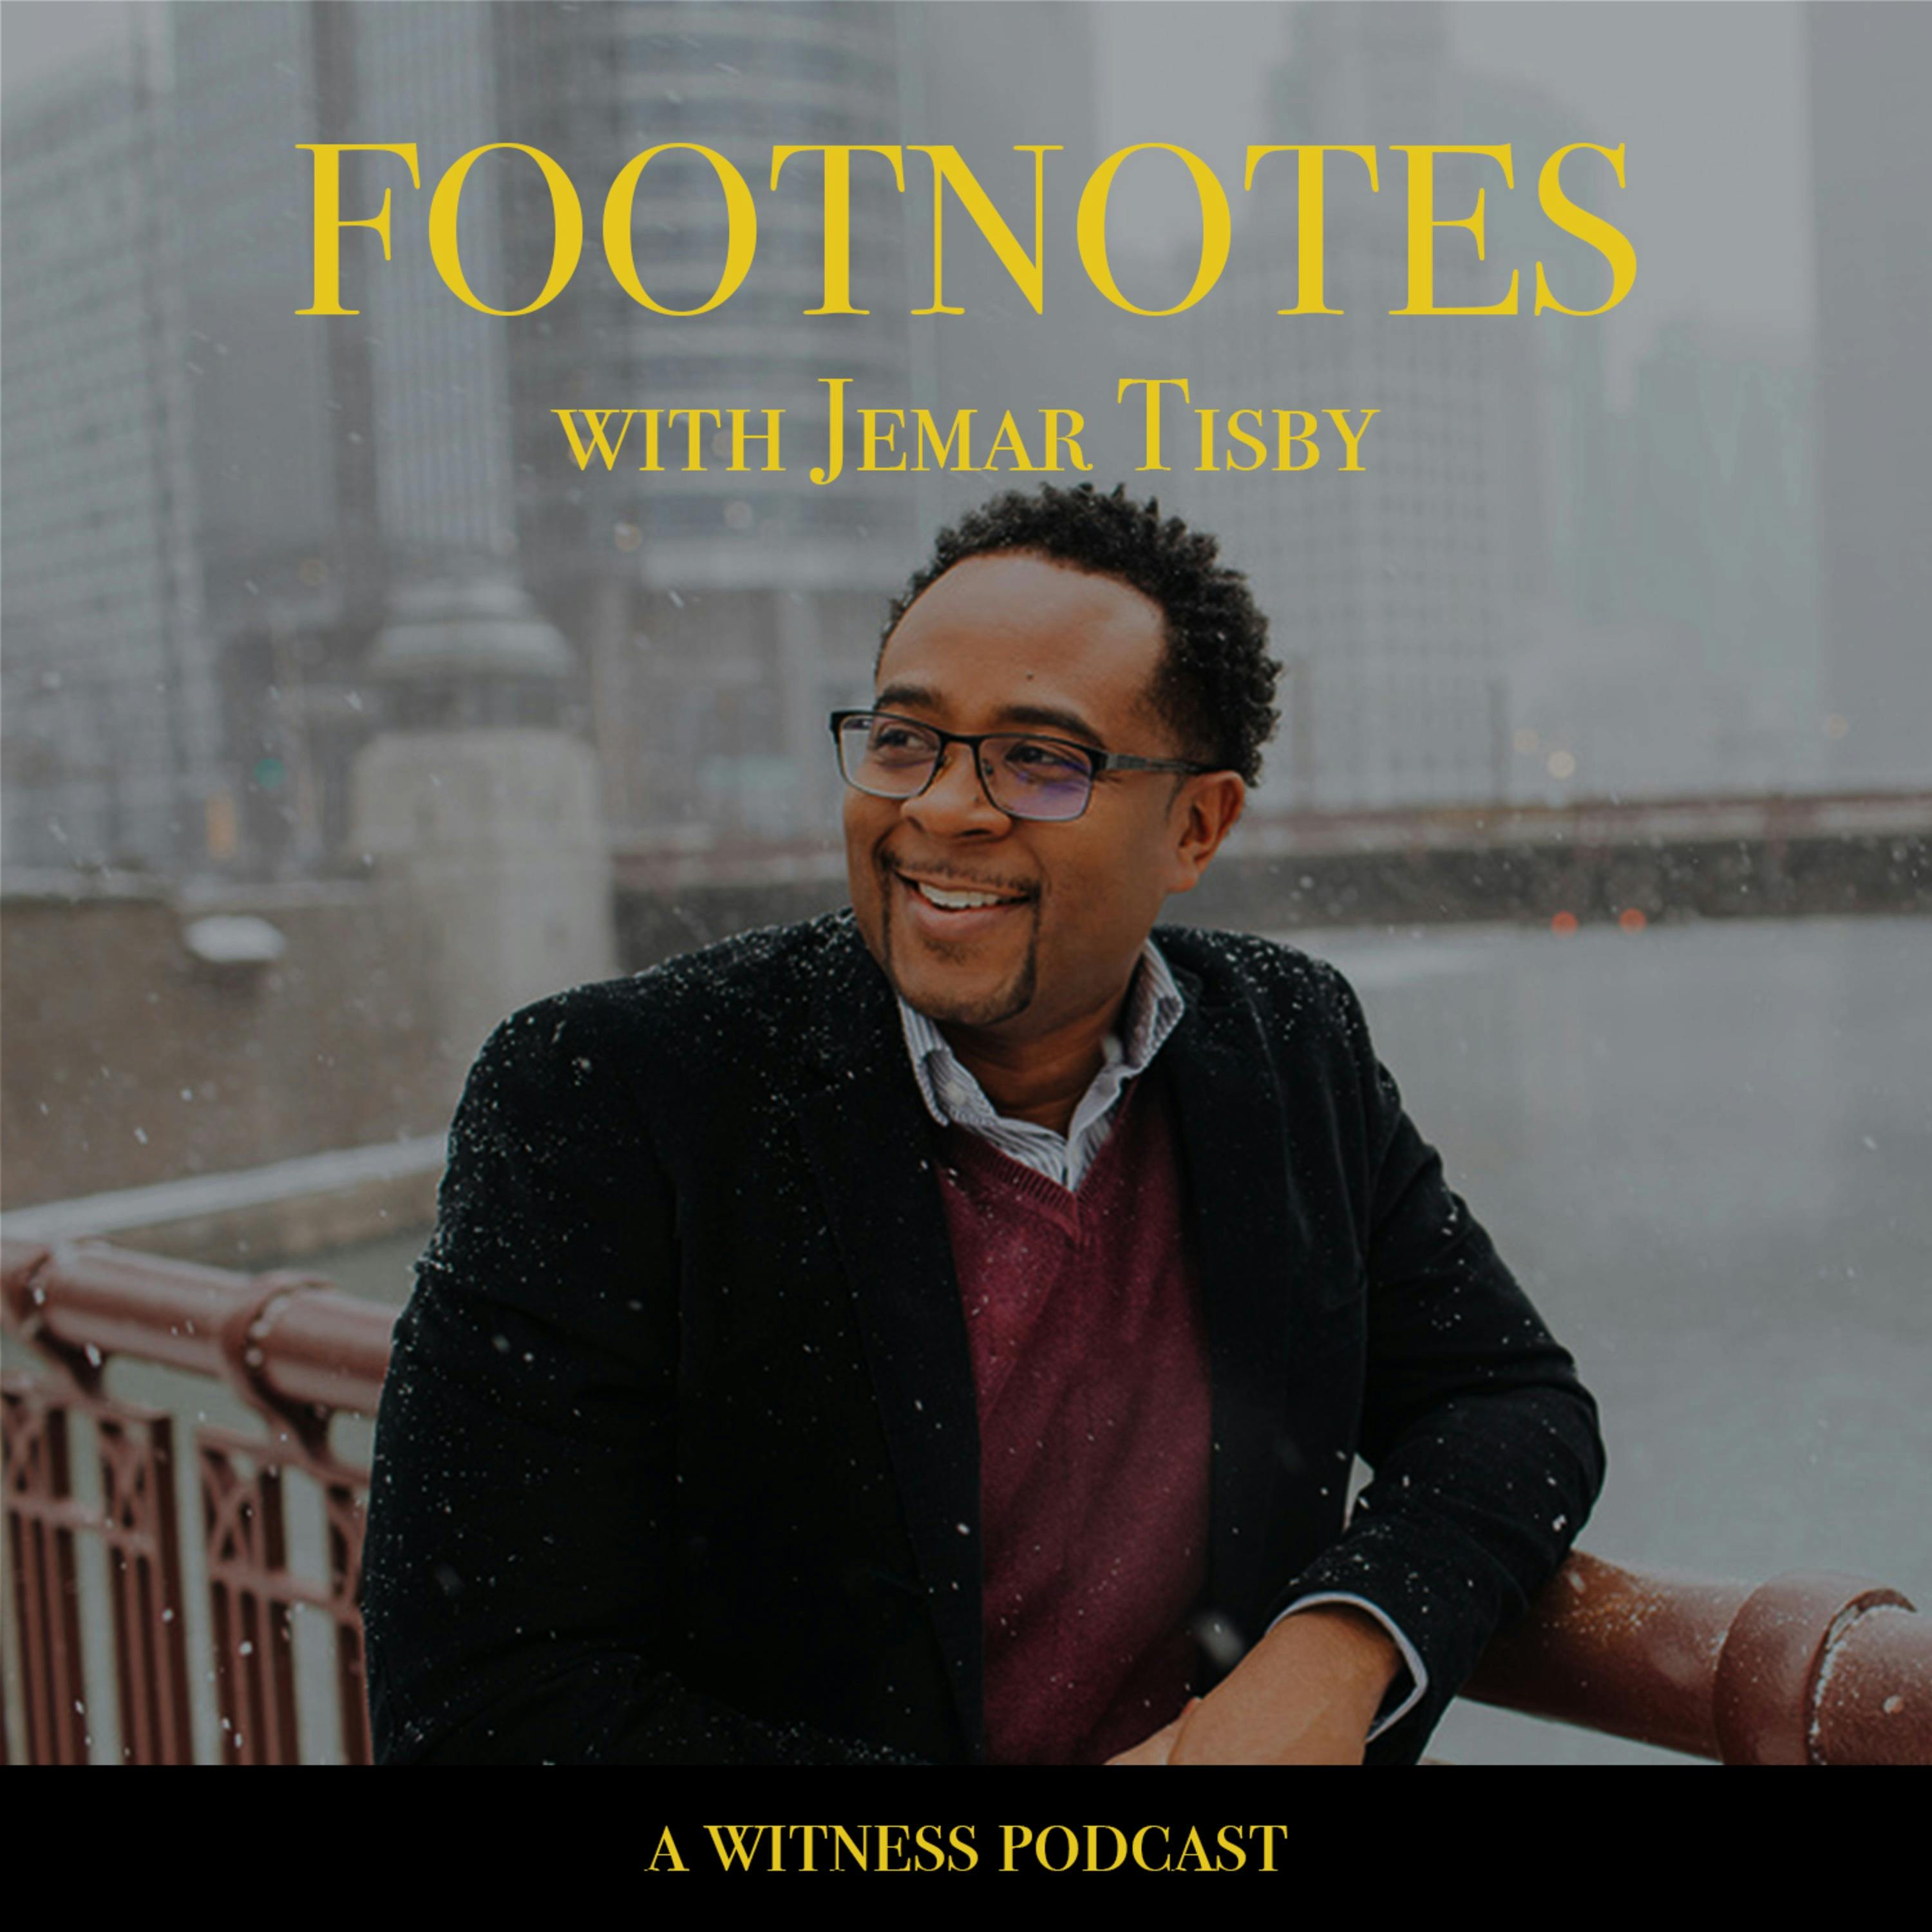 Welcome to Footnotes with Jemar Tisby